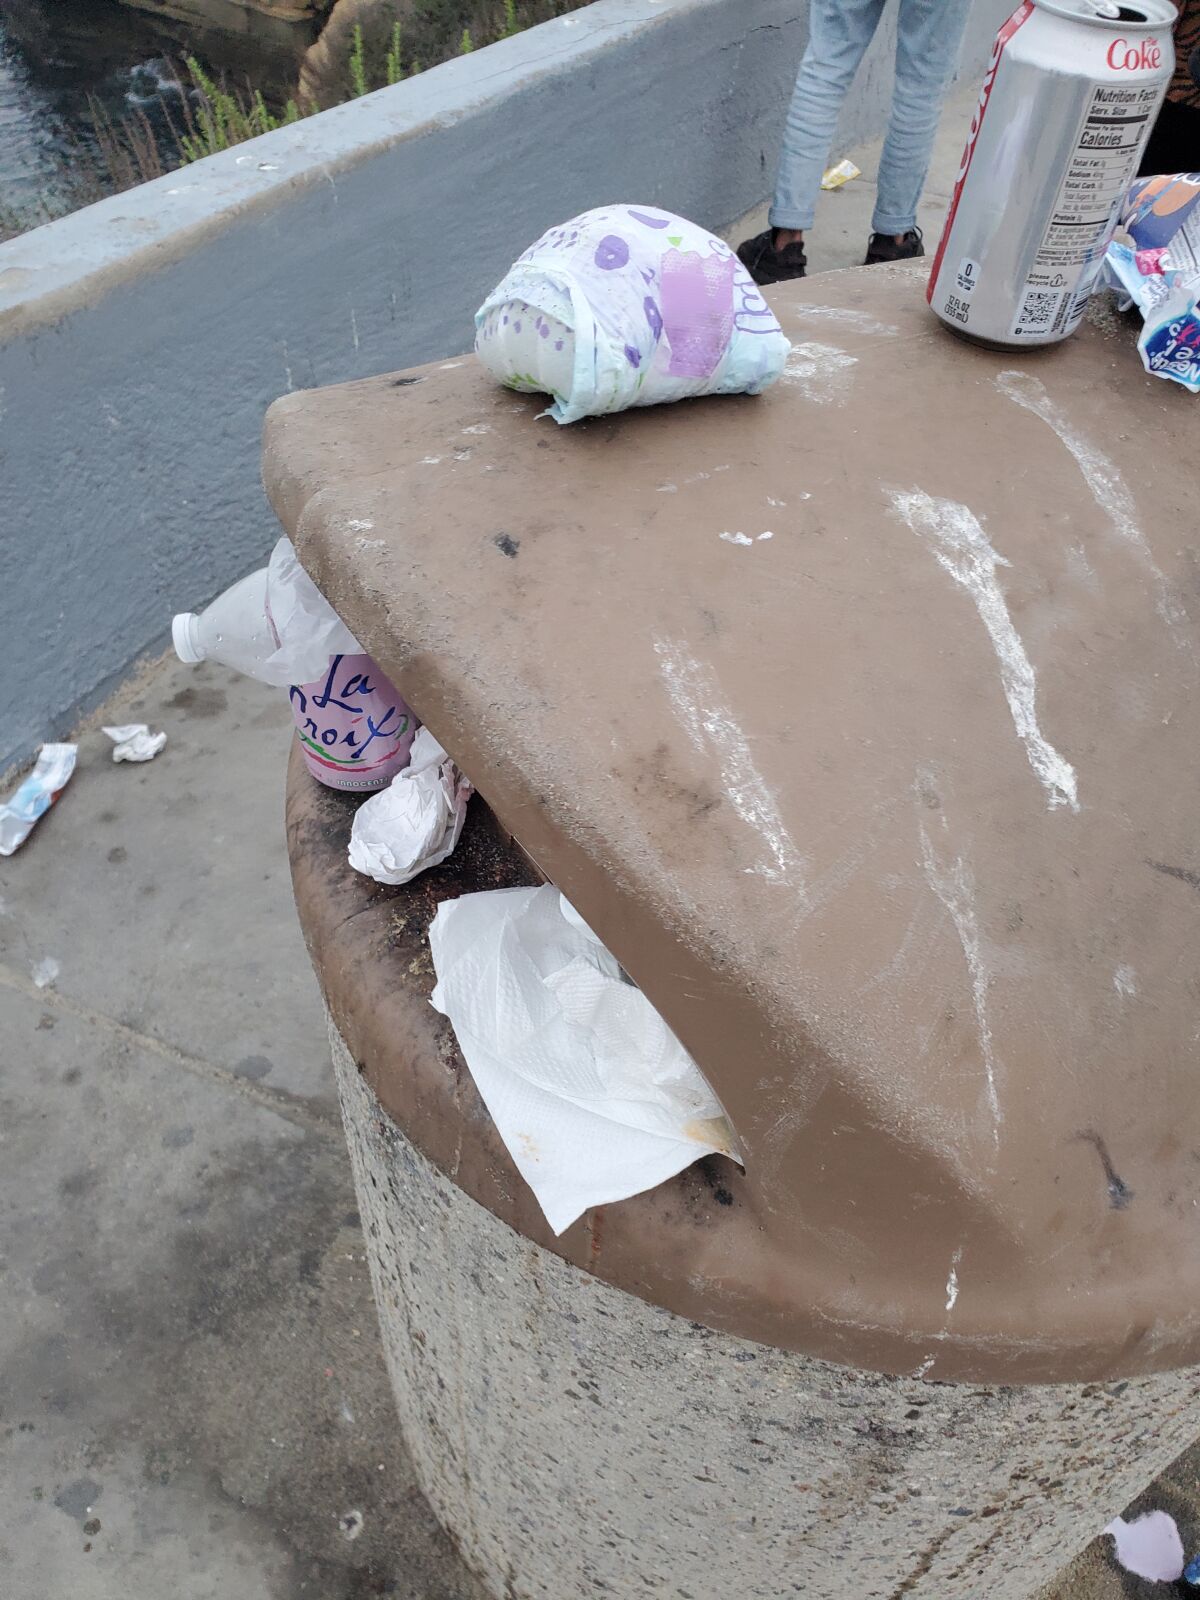 Overflowing trash cans are among the local problems La Jolla Town Council President James Rudolph would like to see solved.